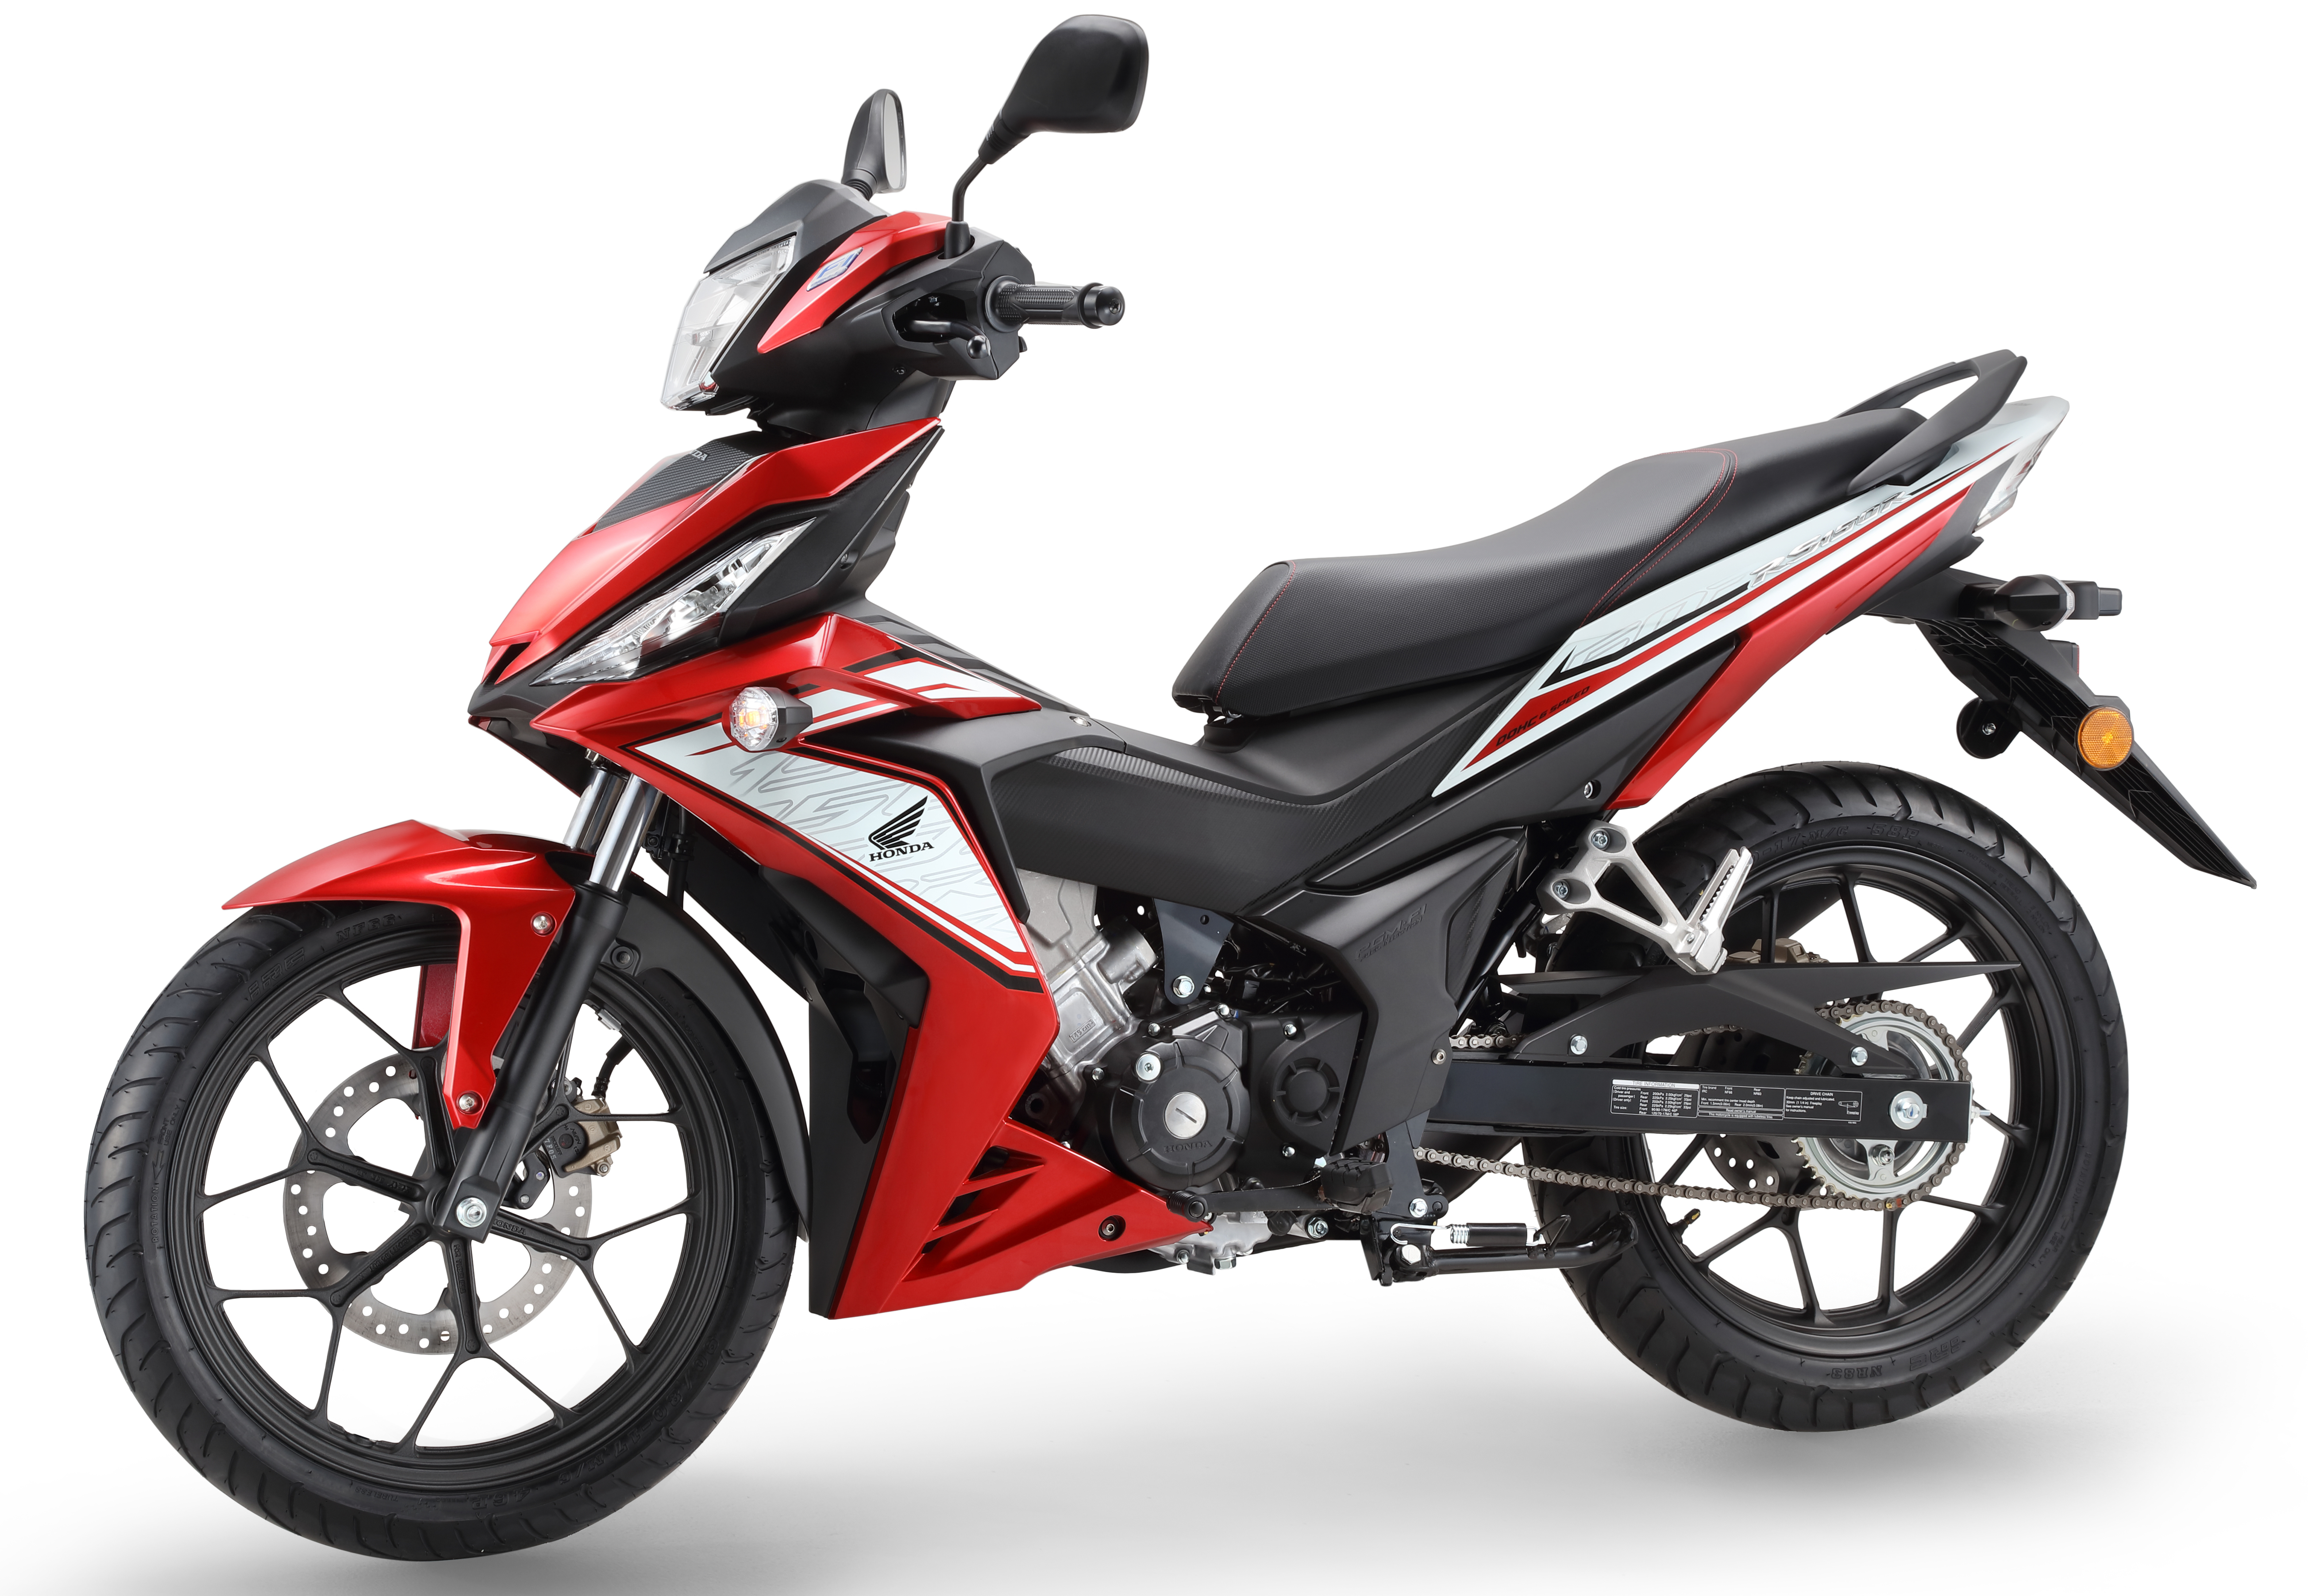 2017 Honda RS150R in new colours - from RM8,478